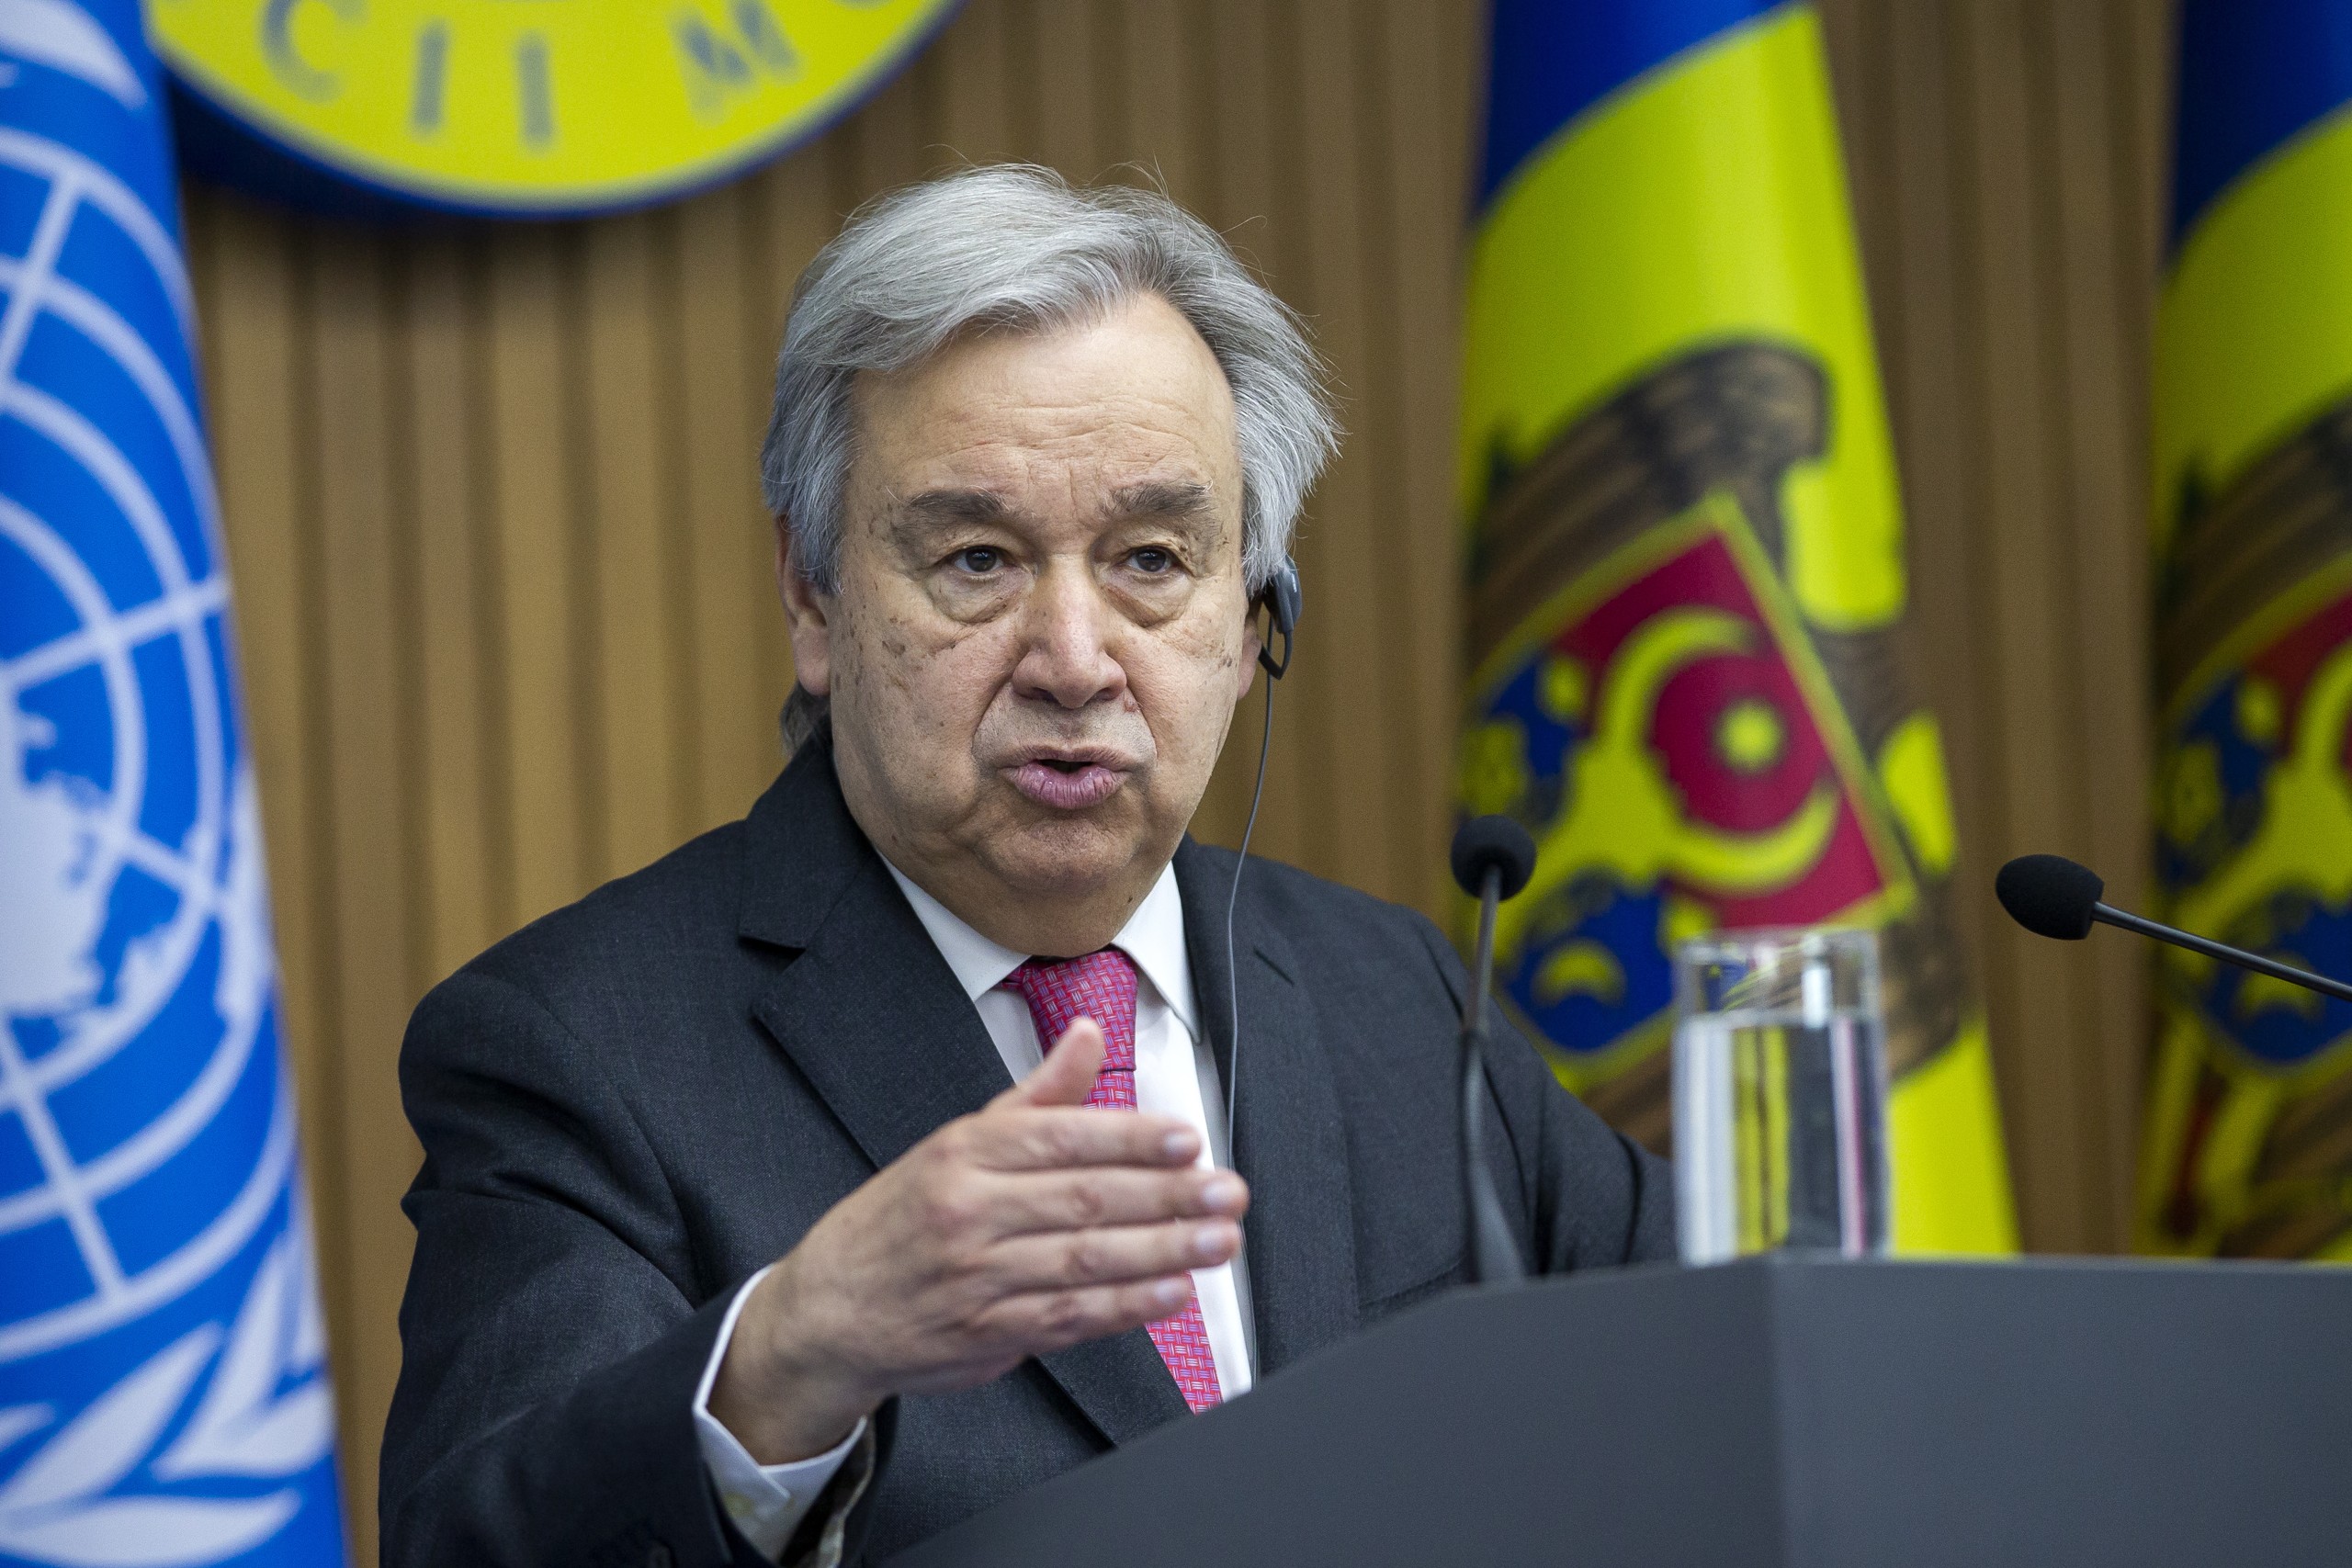 epa09936588 UN Secretary-General Antonio Guterres gestures during a joint press conference with Moldovan Prime Minister Natalia Gavrilita (not pictured) during his two-day official visit in the government building in Chisinau, Moldova, on 09 May 2022.  EPA/DUMITRU DORU